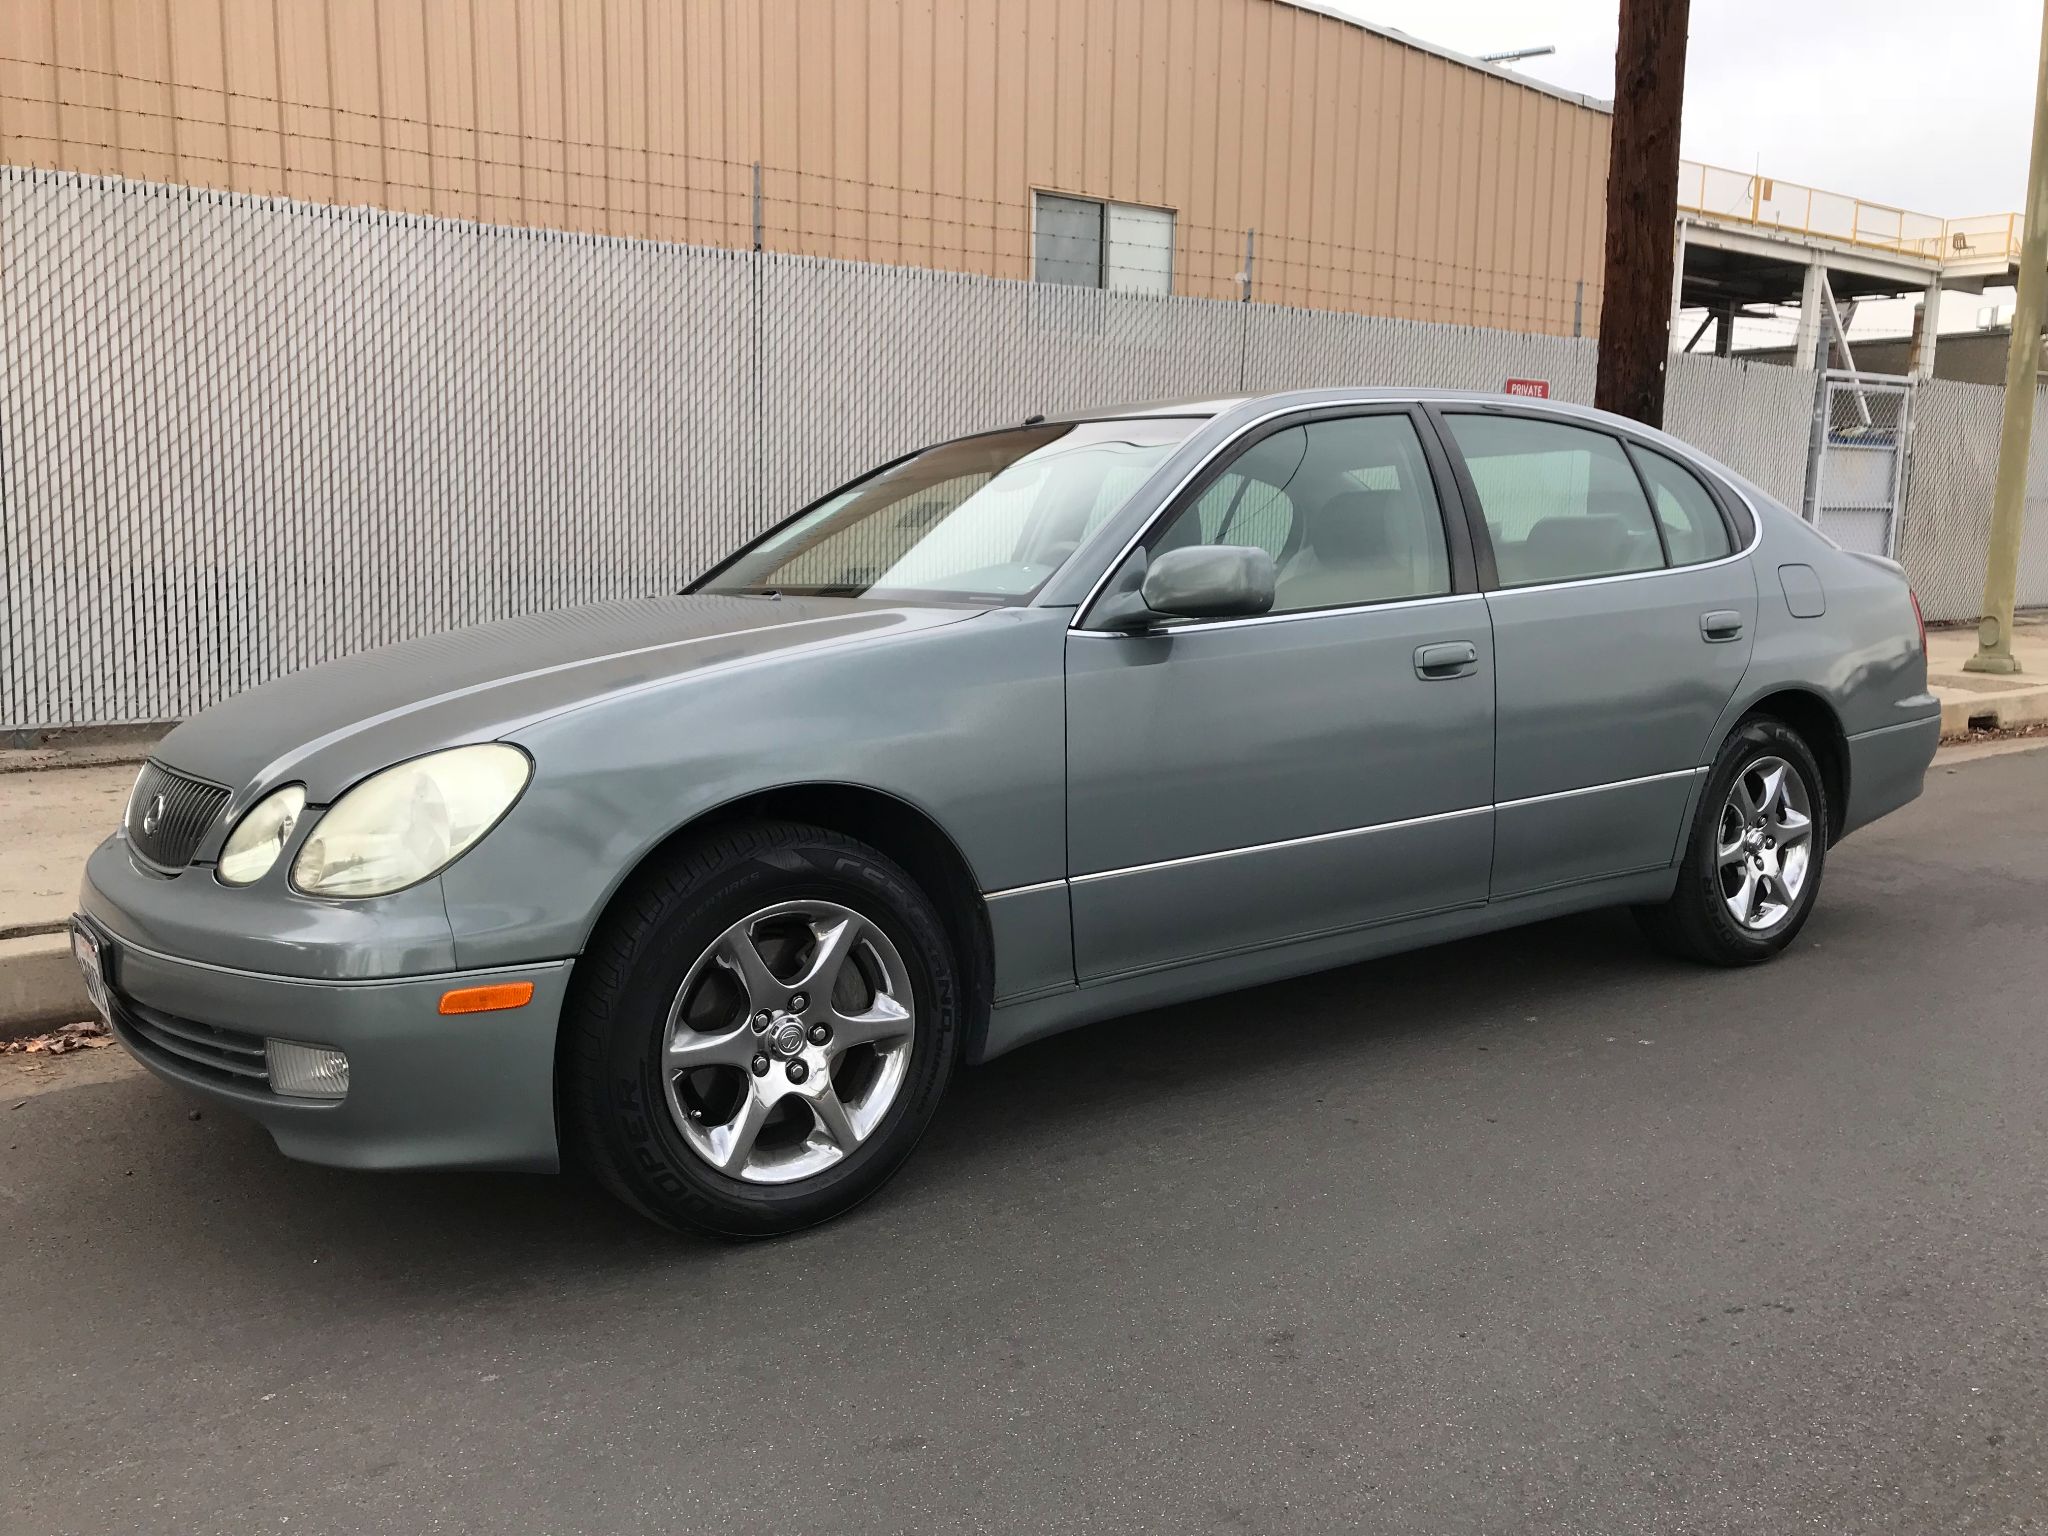 Used 2002 Lexus GS 300 GLS at City Cars Warehouse INC